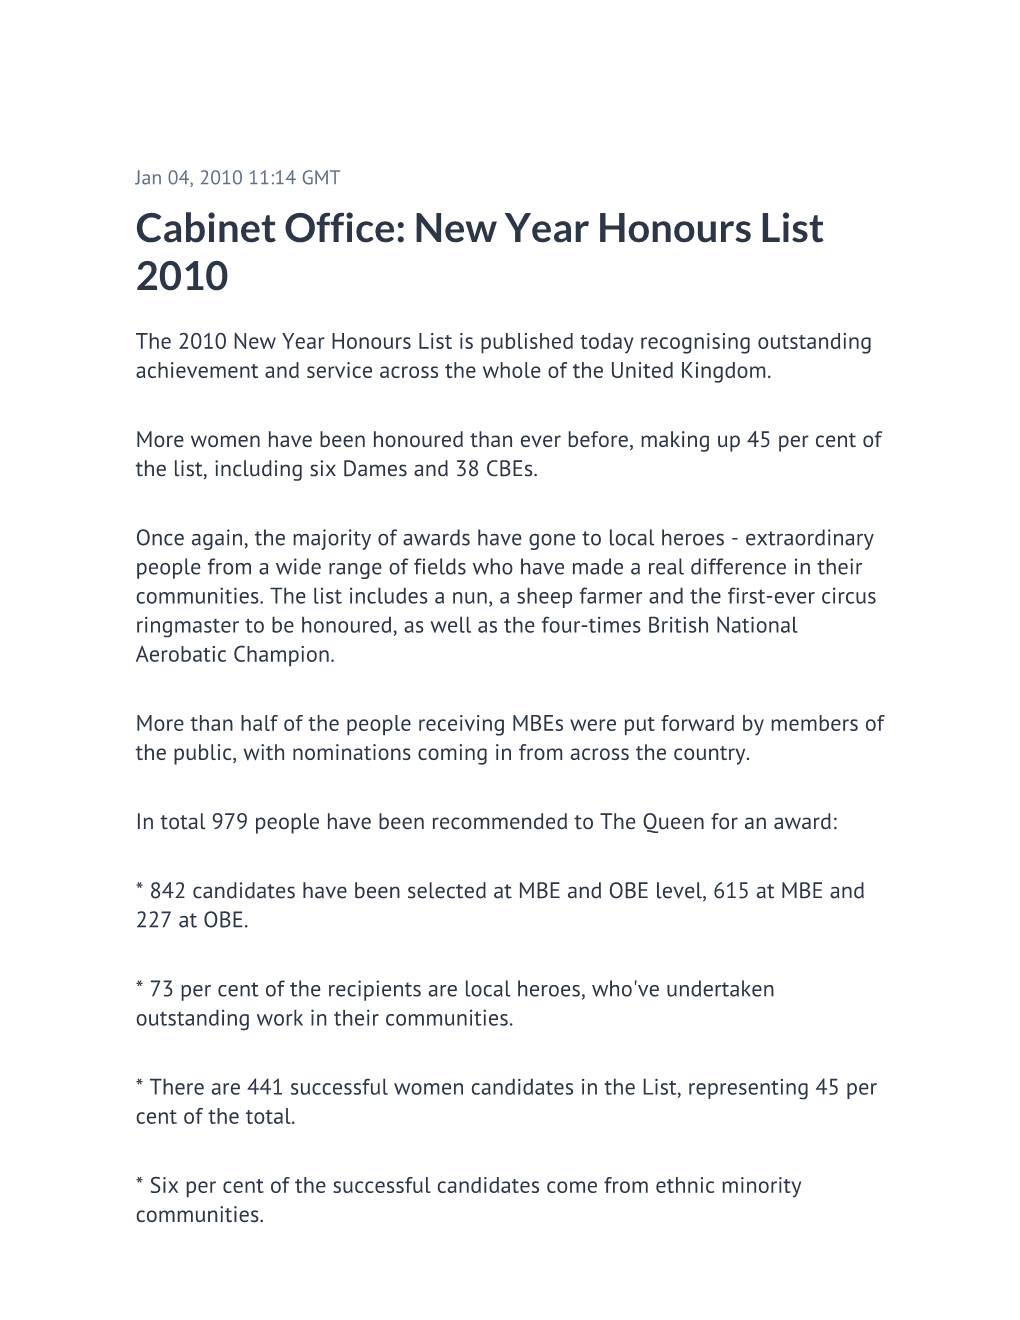 Cabinet Office: New Year Honours List 2010